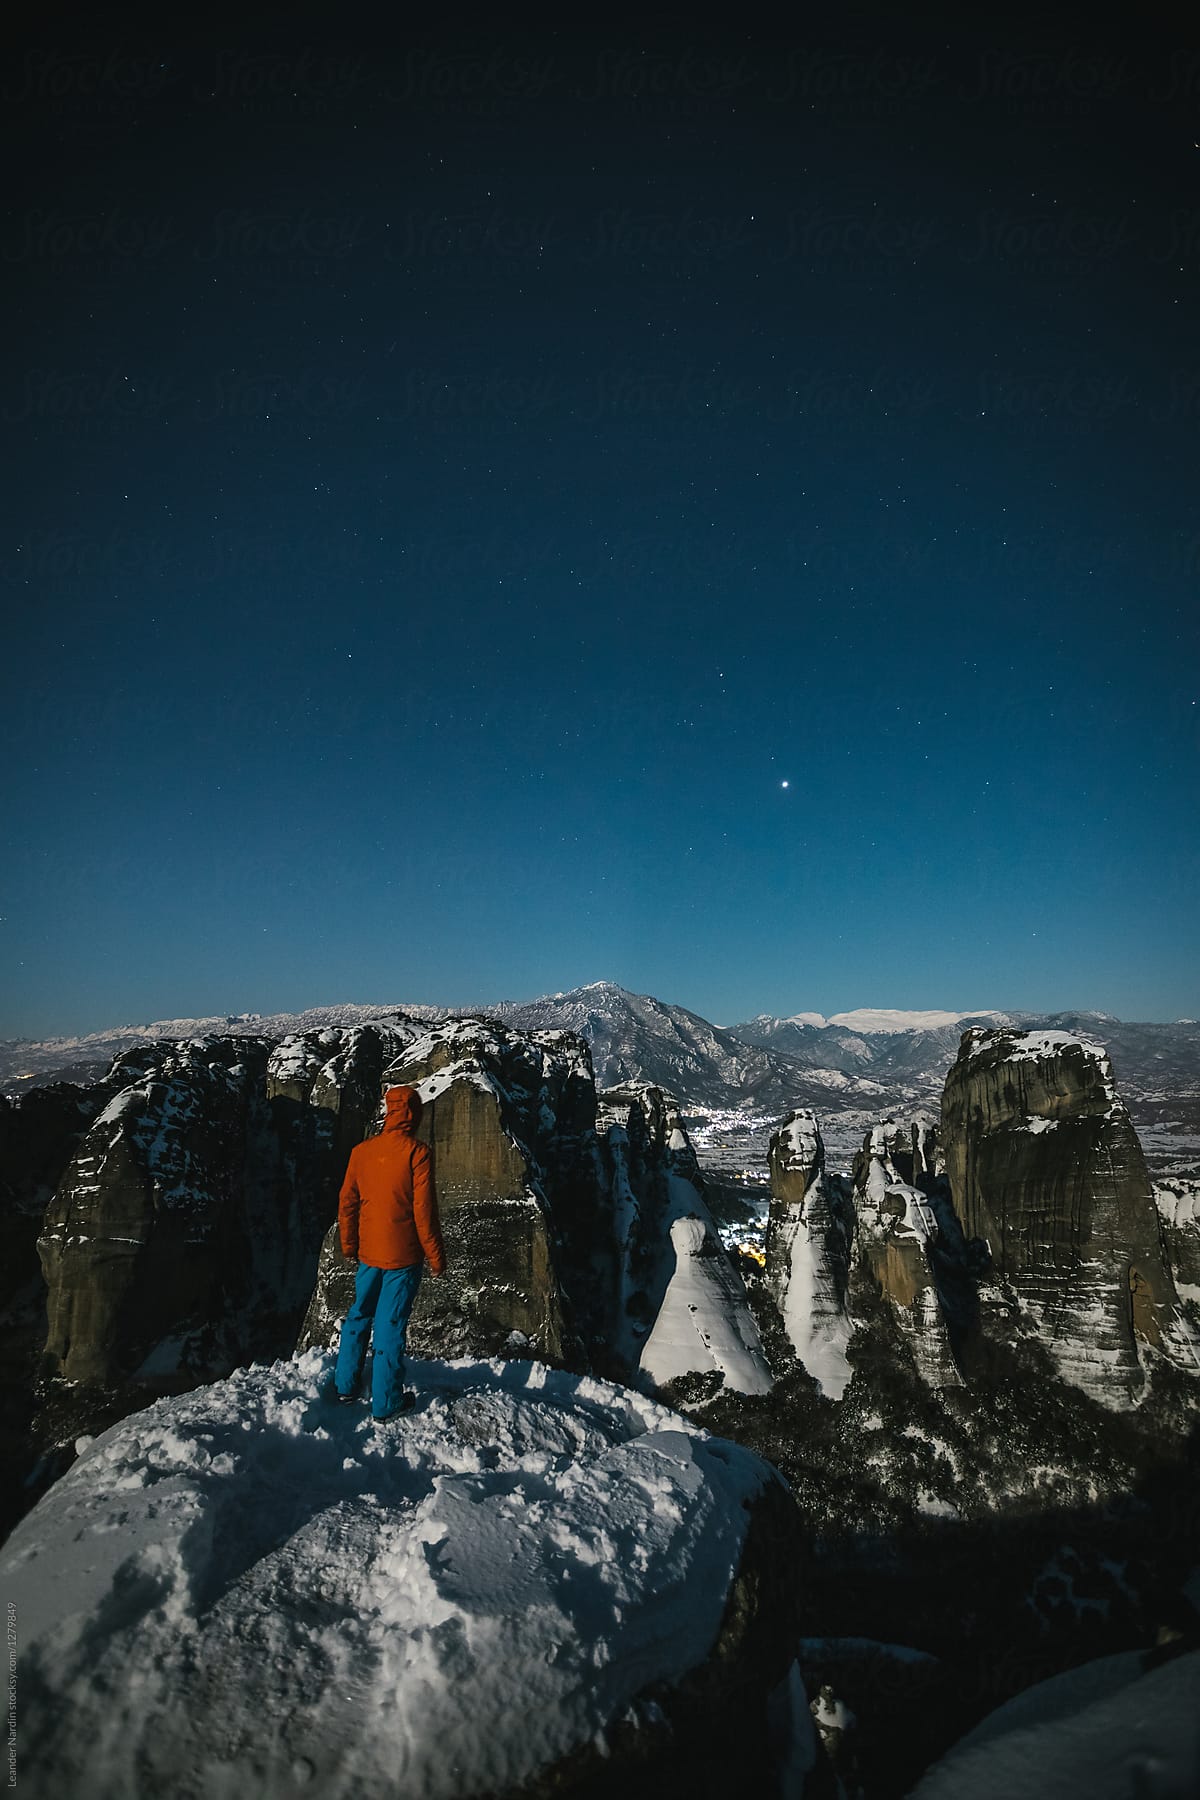 mountaineer standing on snowcovered rocks overlooking meteora at night